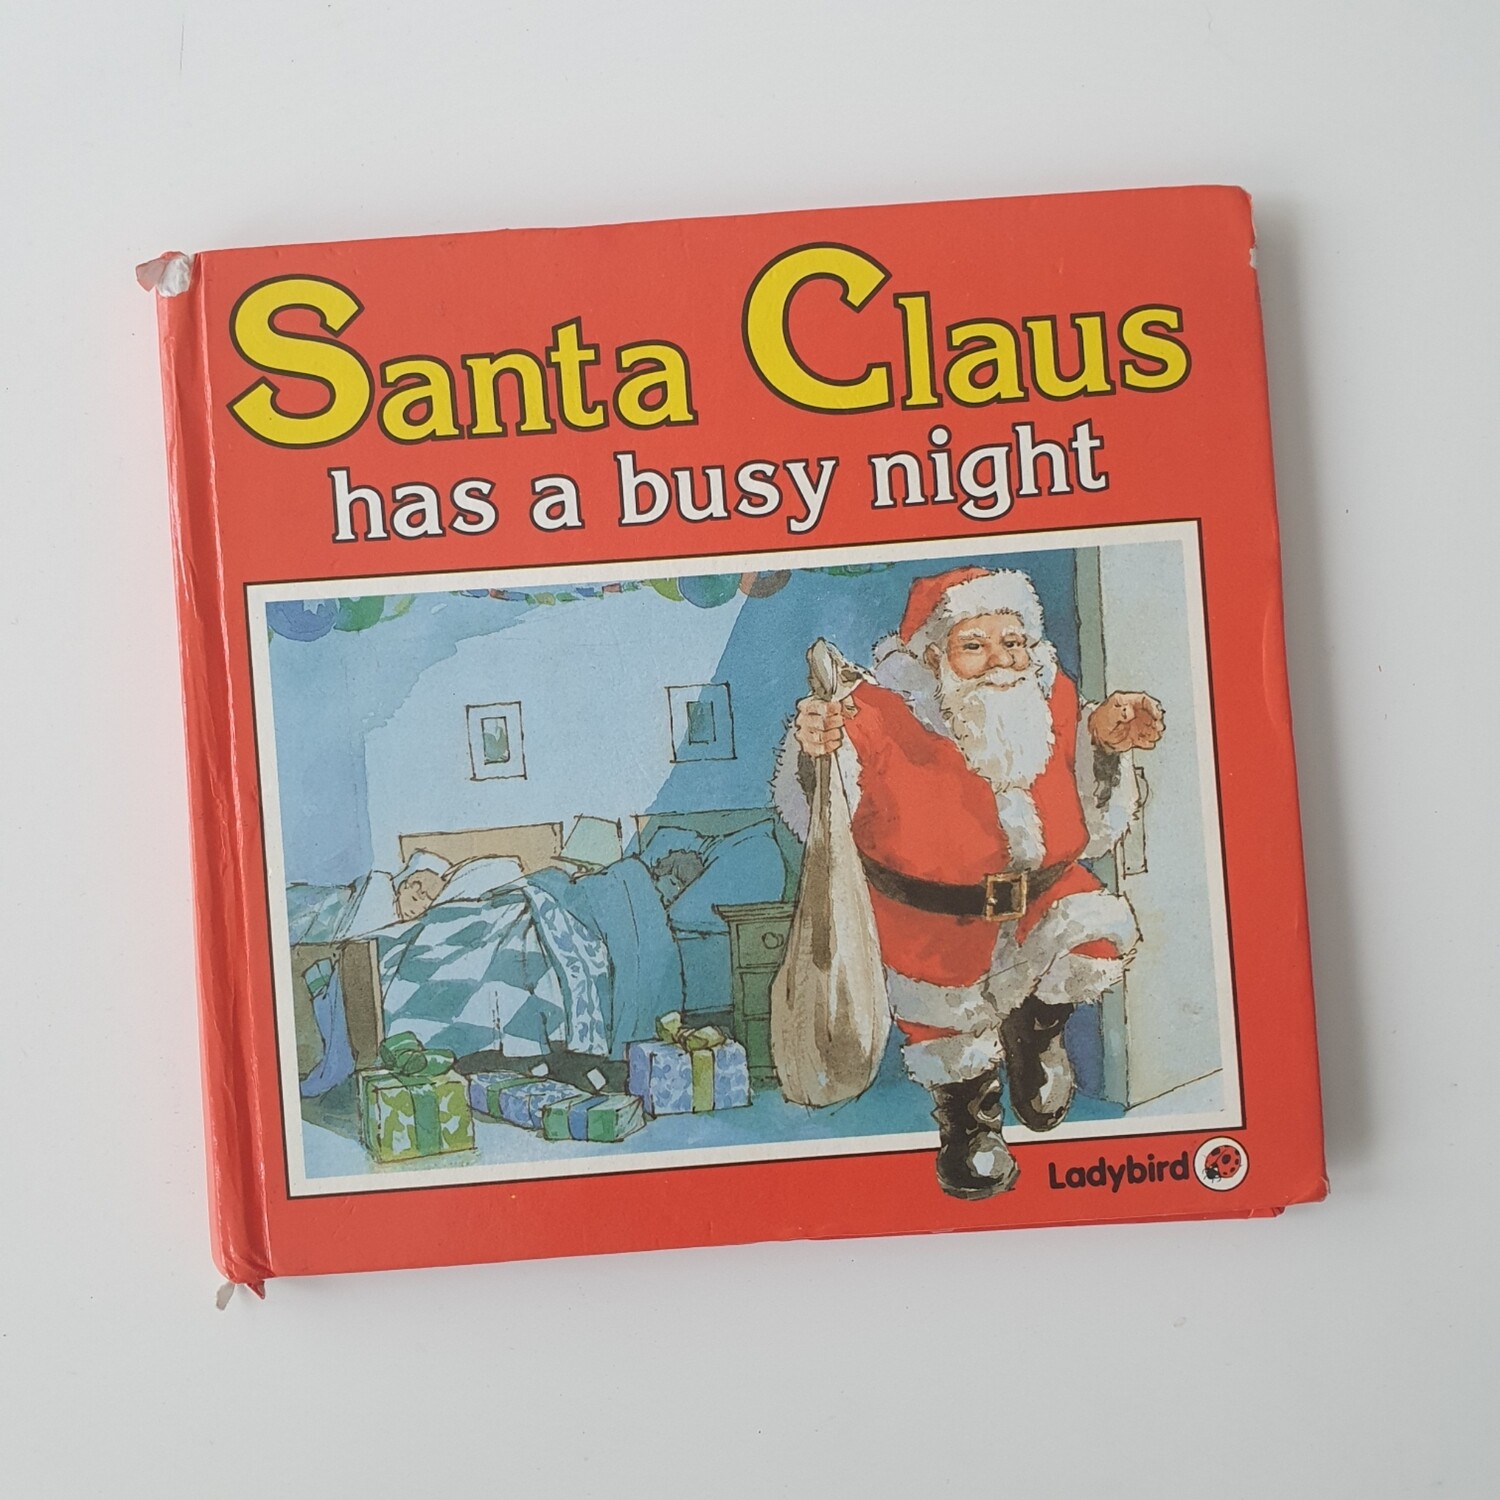 Santa Claus has a busy night - Father Christmas